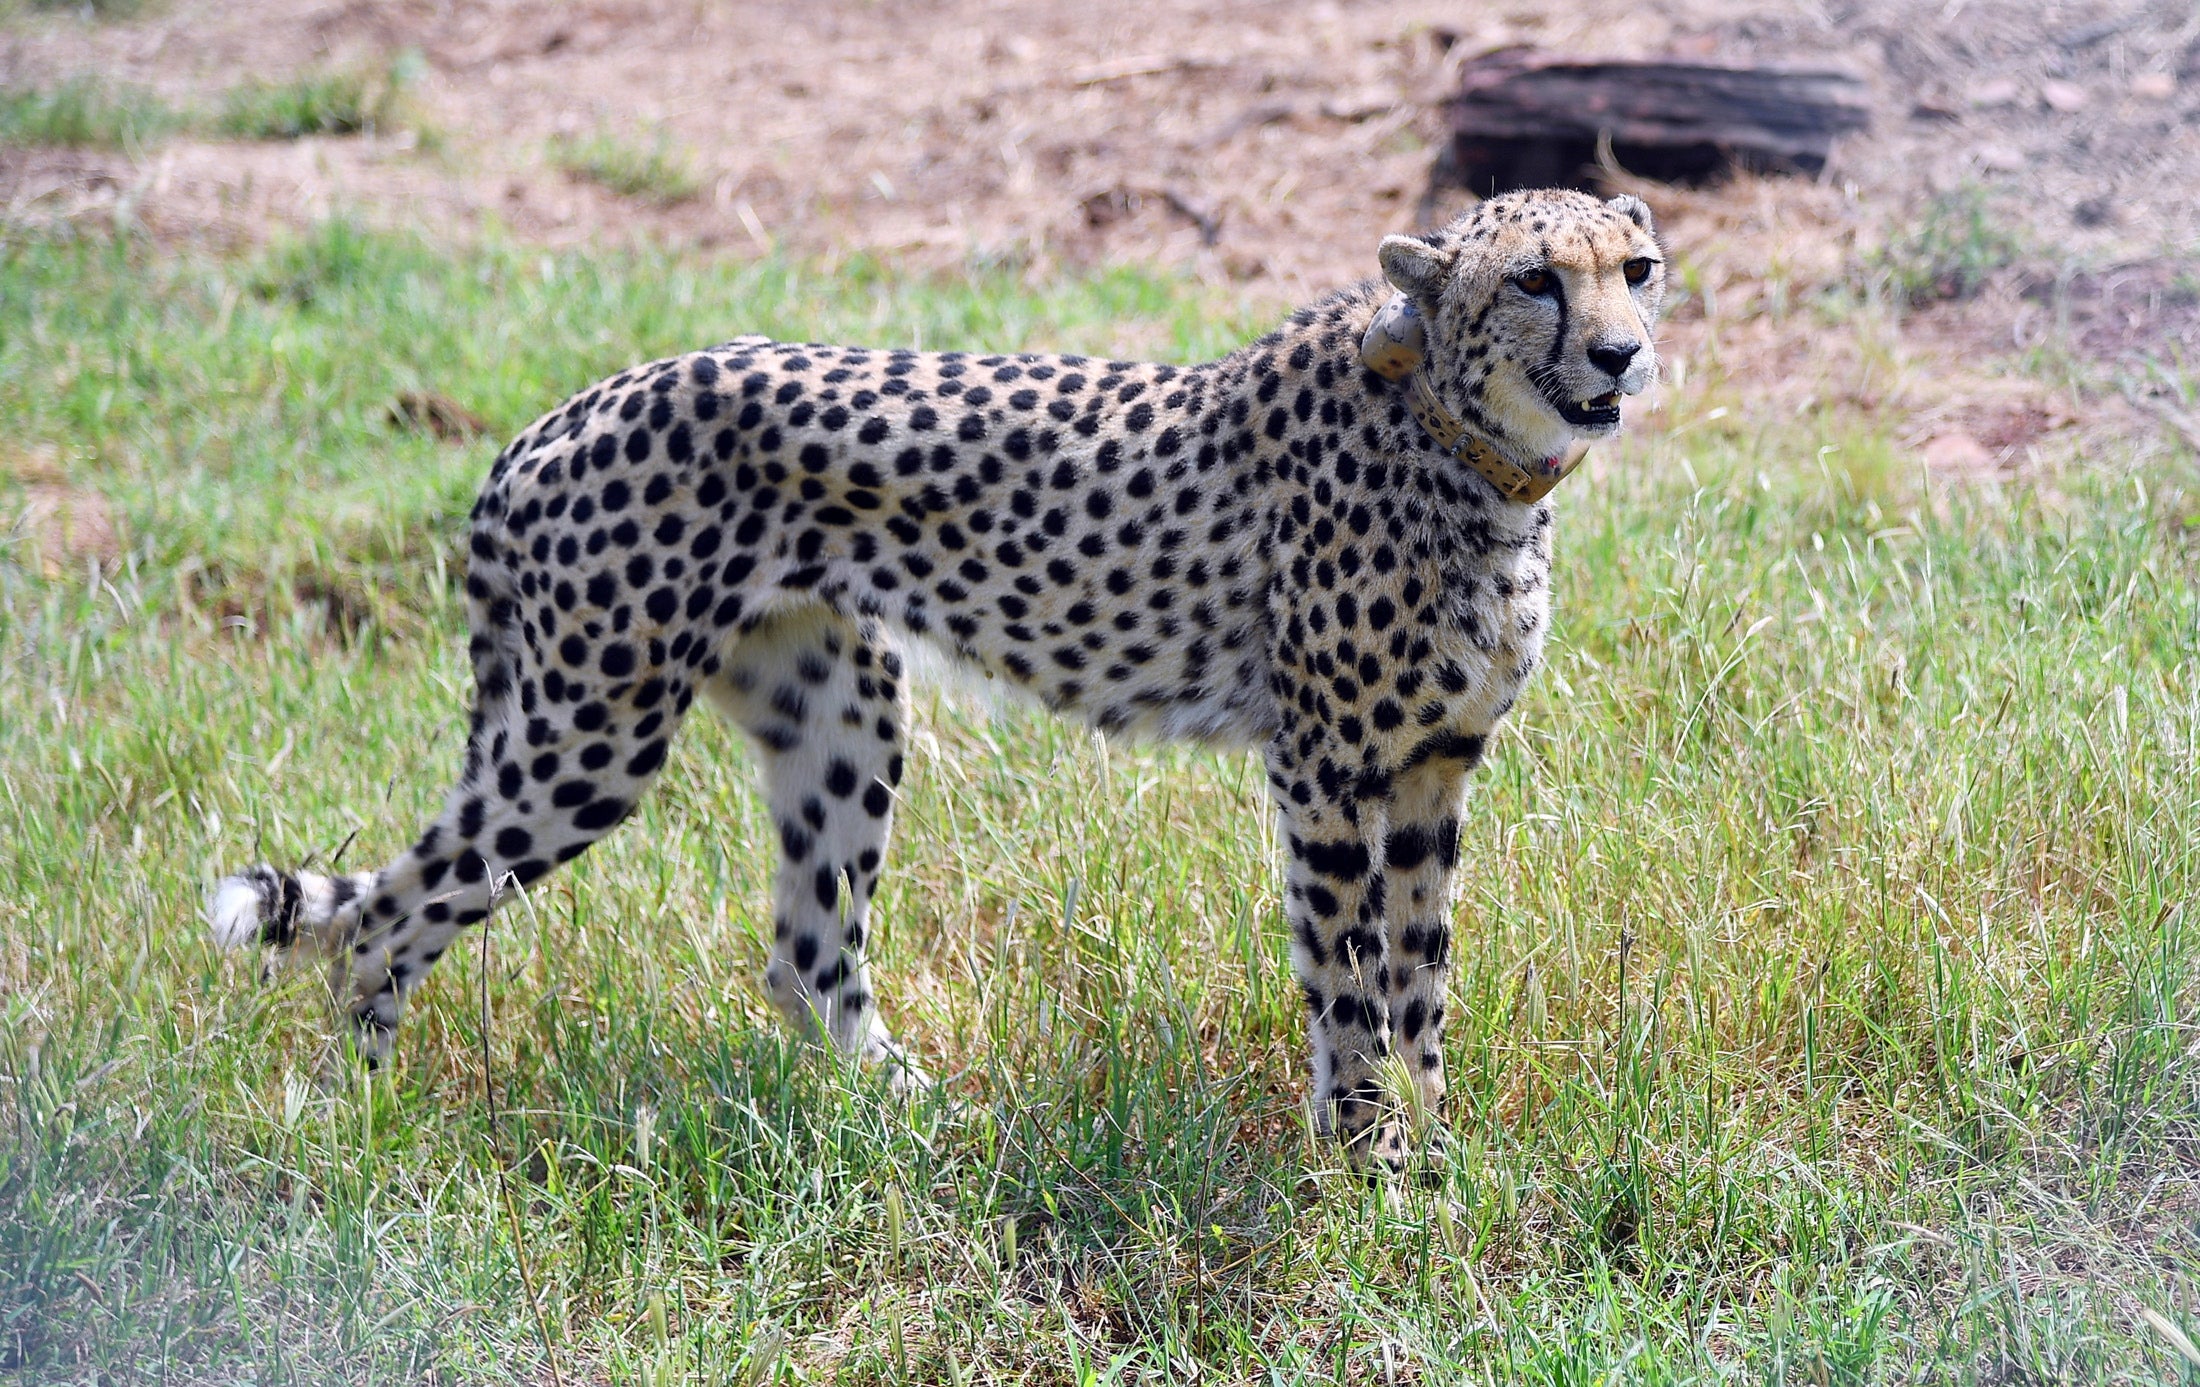 One of the female cheetahs, Dhatri (renamed from Tbilisi), was found dead in the park on Wednesday morning, officials said